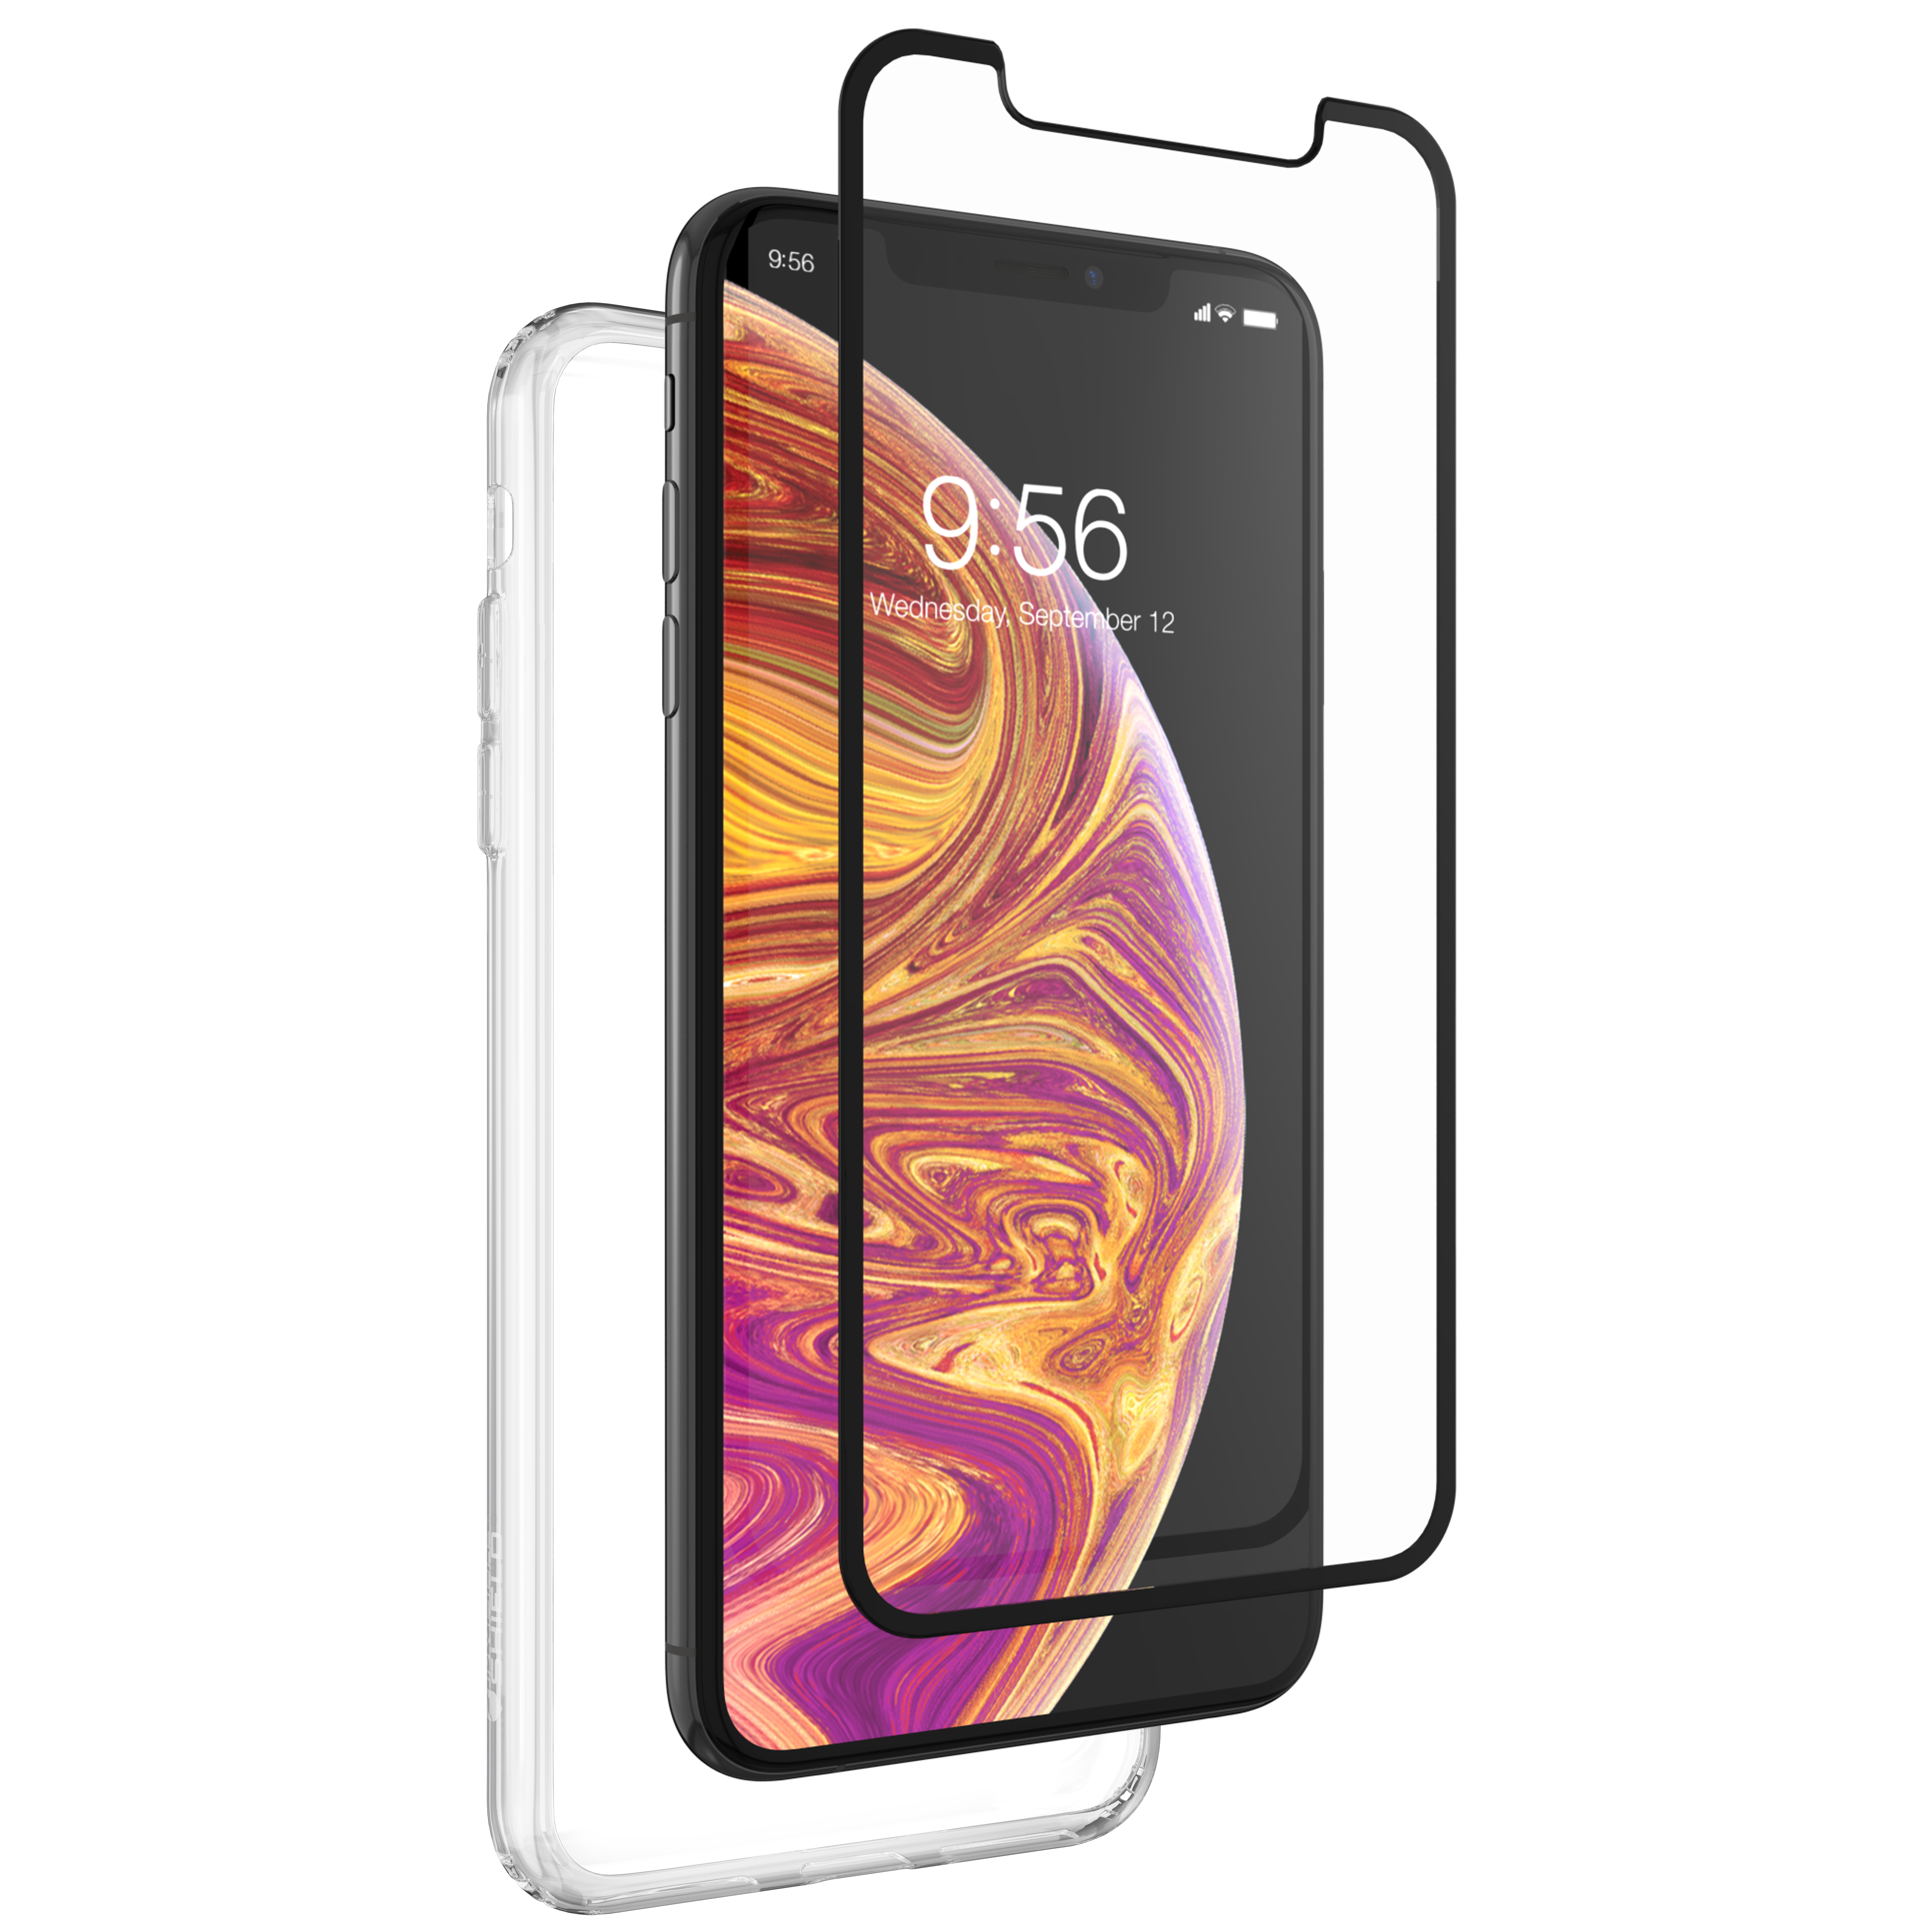 Invisibleshield 360 Protection Case + Glass Curve Screen Protector for iPhone XS